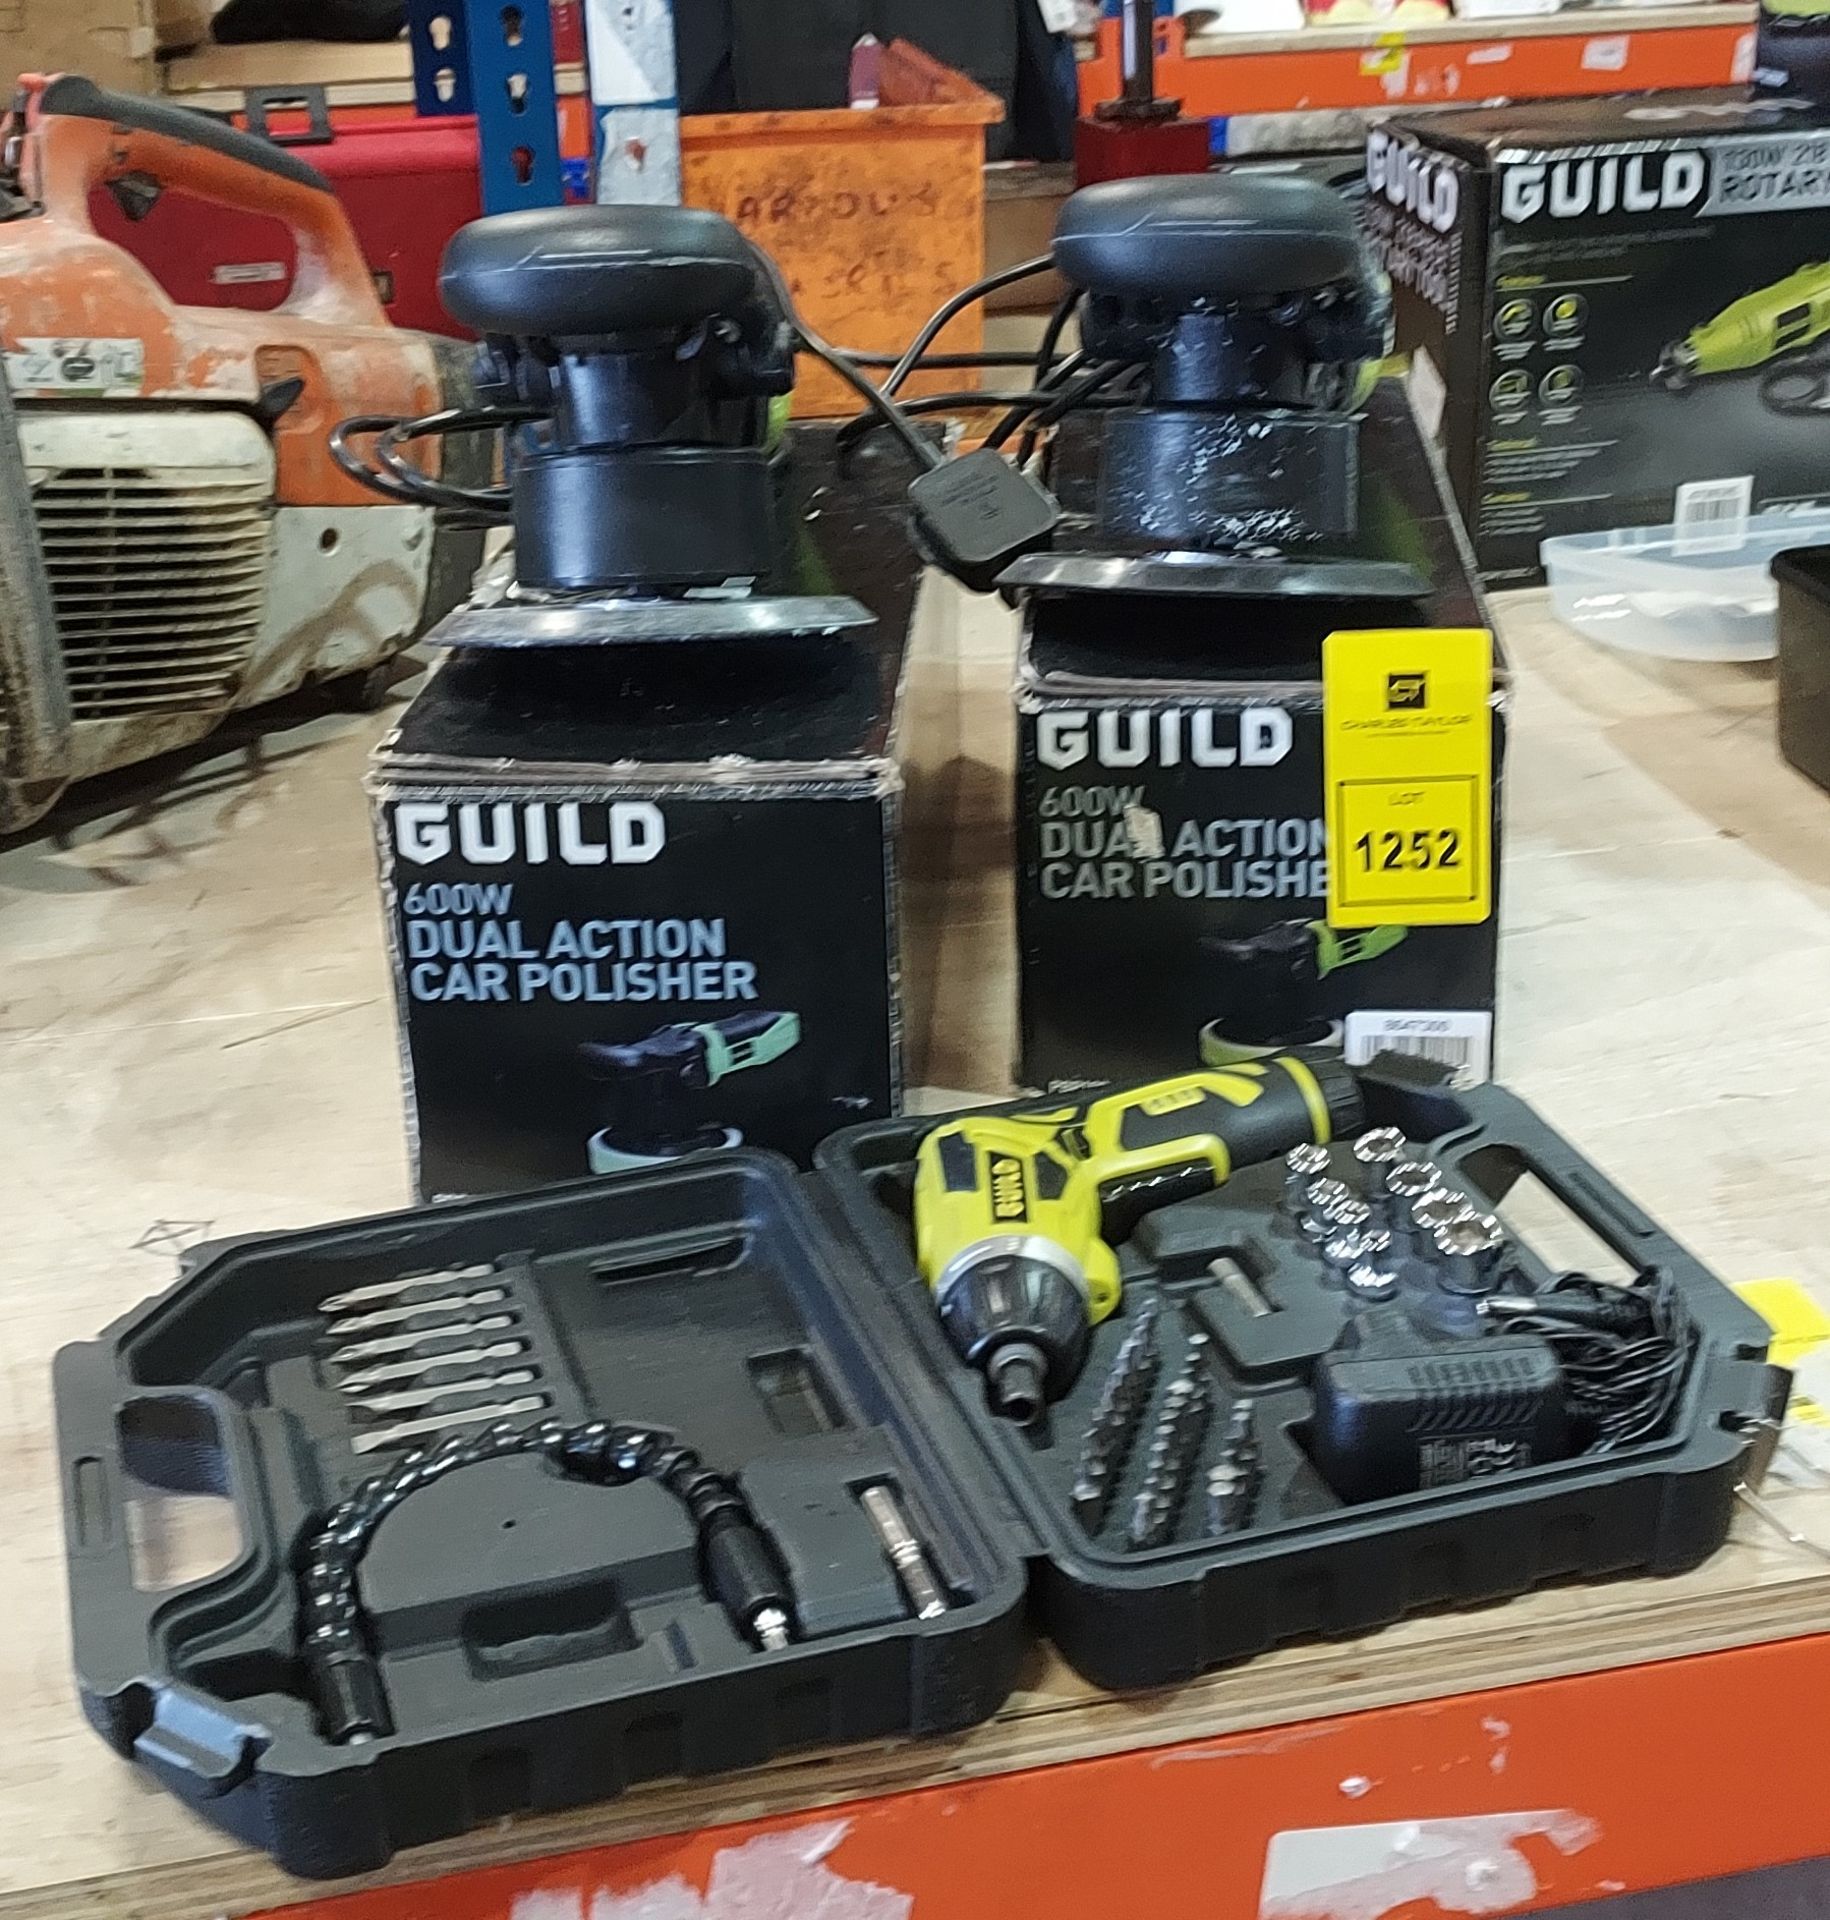 3 PIECE TOOL LOT TO INCLUDE 2 X GUILD 600 W DUAL ACTION CAR POLISHERS AND 1 X GUILD 3.6V